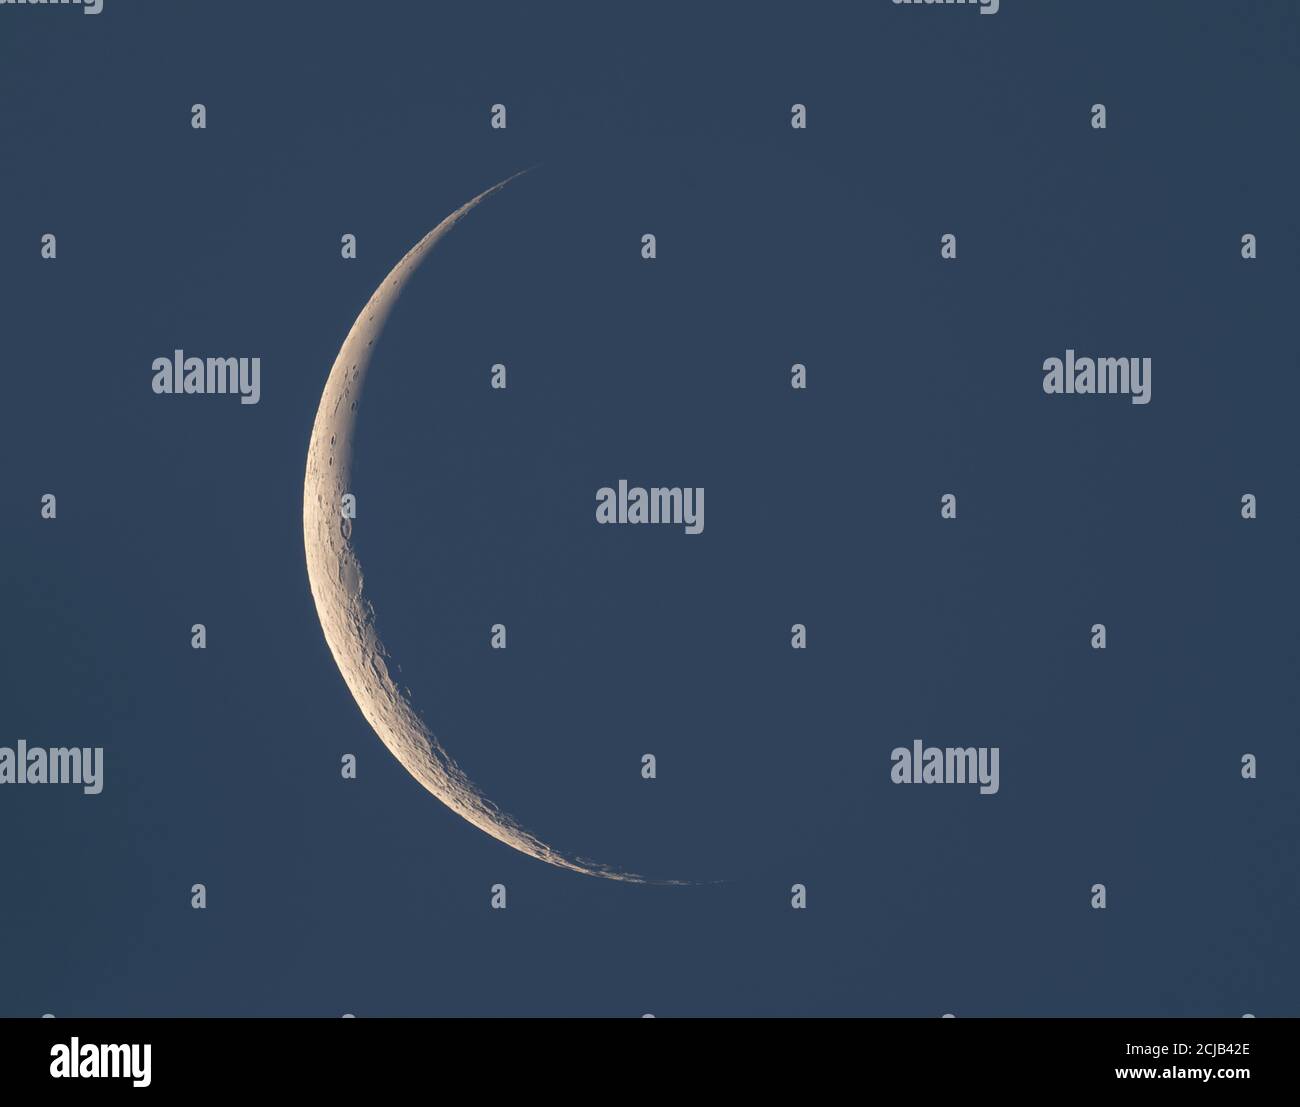 London, UK. 15 September 2020. 7% waning crescent Moon in pre-dawn clear sky above London. Credit: Malcolm Park/Alamy Live News. Stock Photo